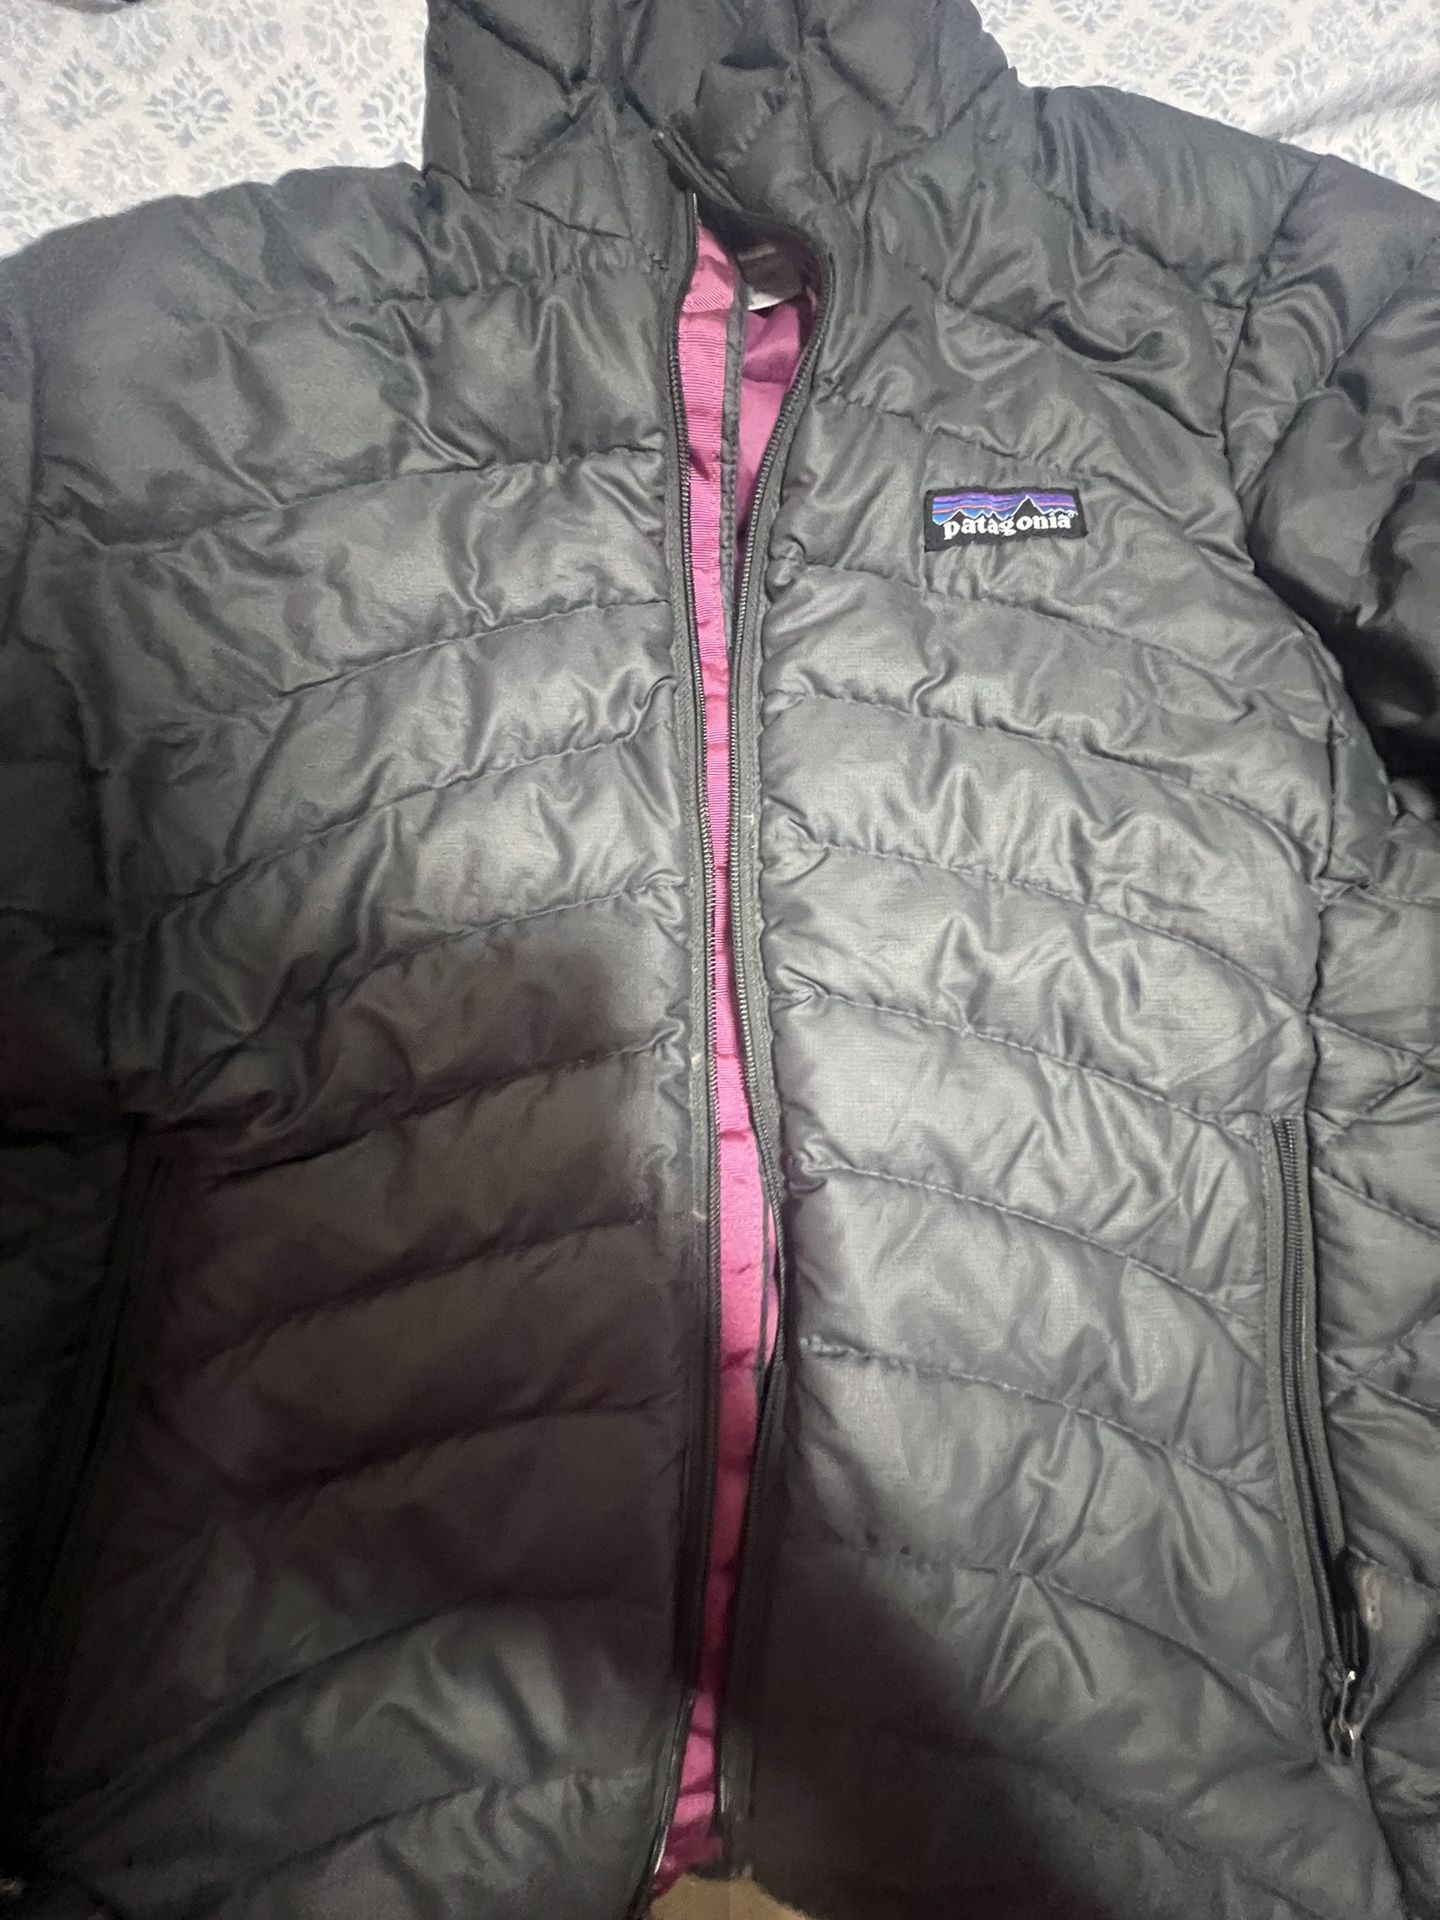 Patagonia jacket Great Condition 